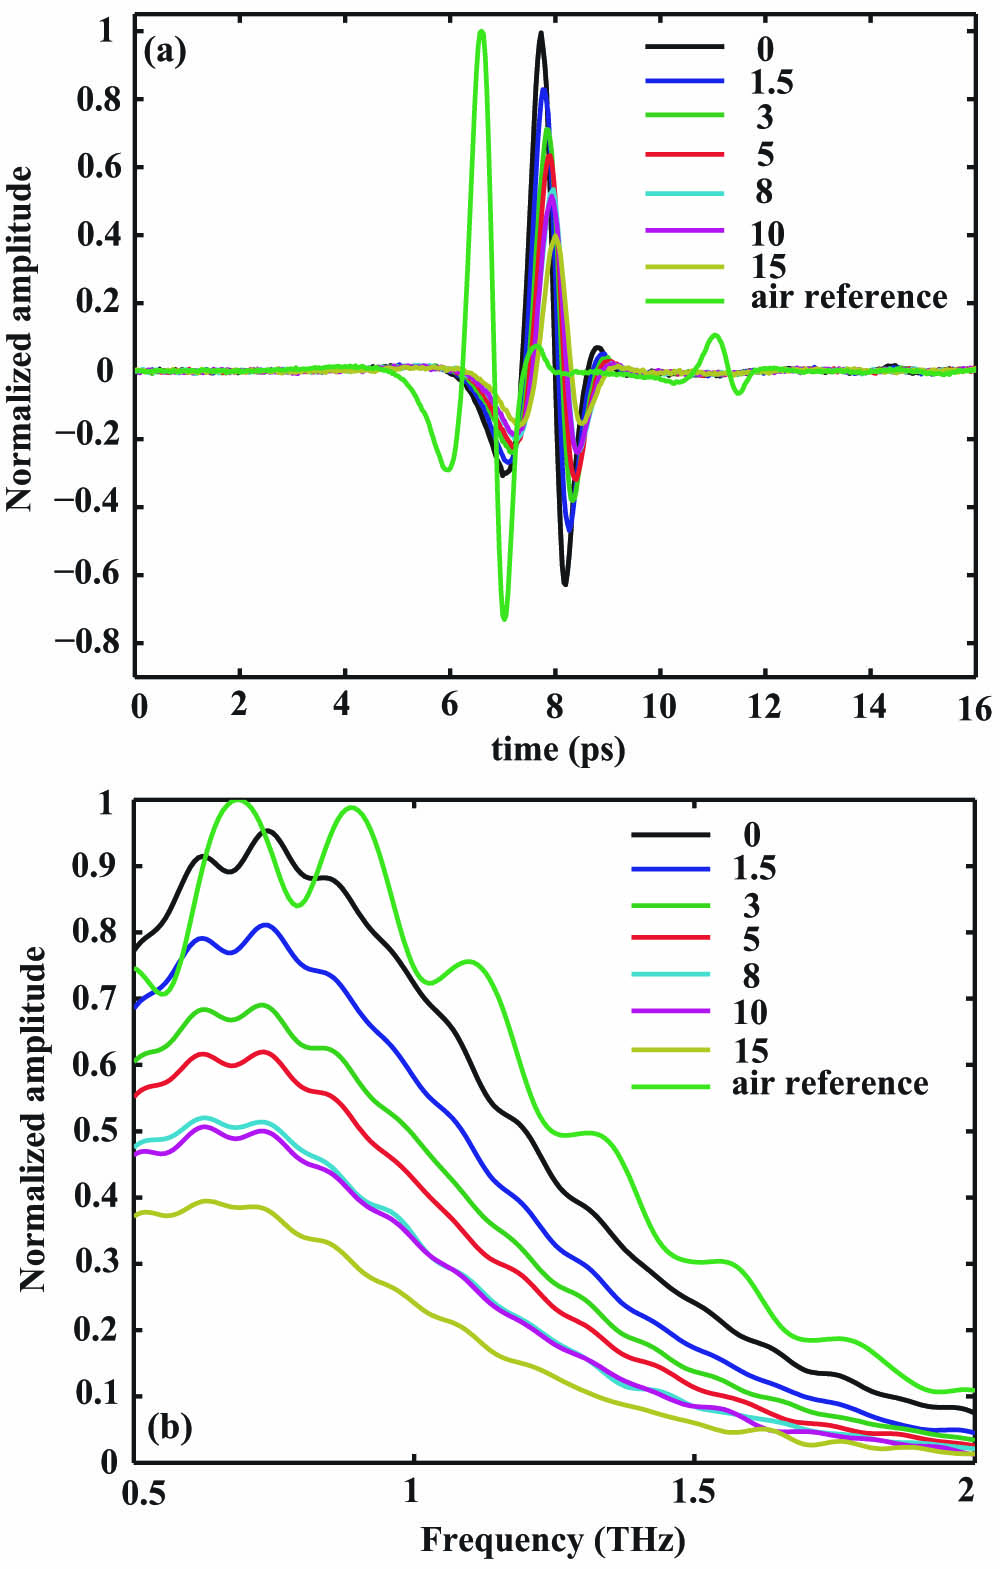 (a) Time-domain spectra of air reference and measured reverse micelle mixtures; (b) frequency-domain spectra of air reference and measured reverse micelle mixtures.